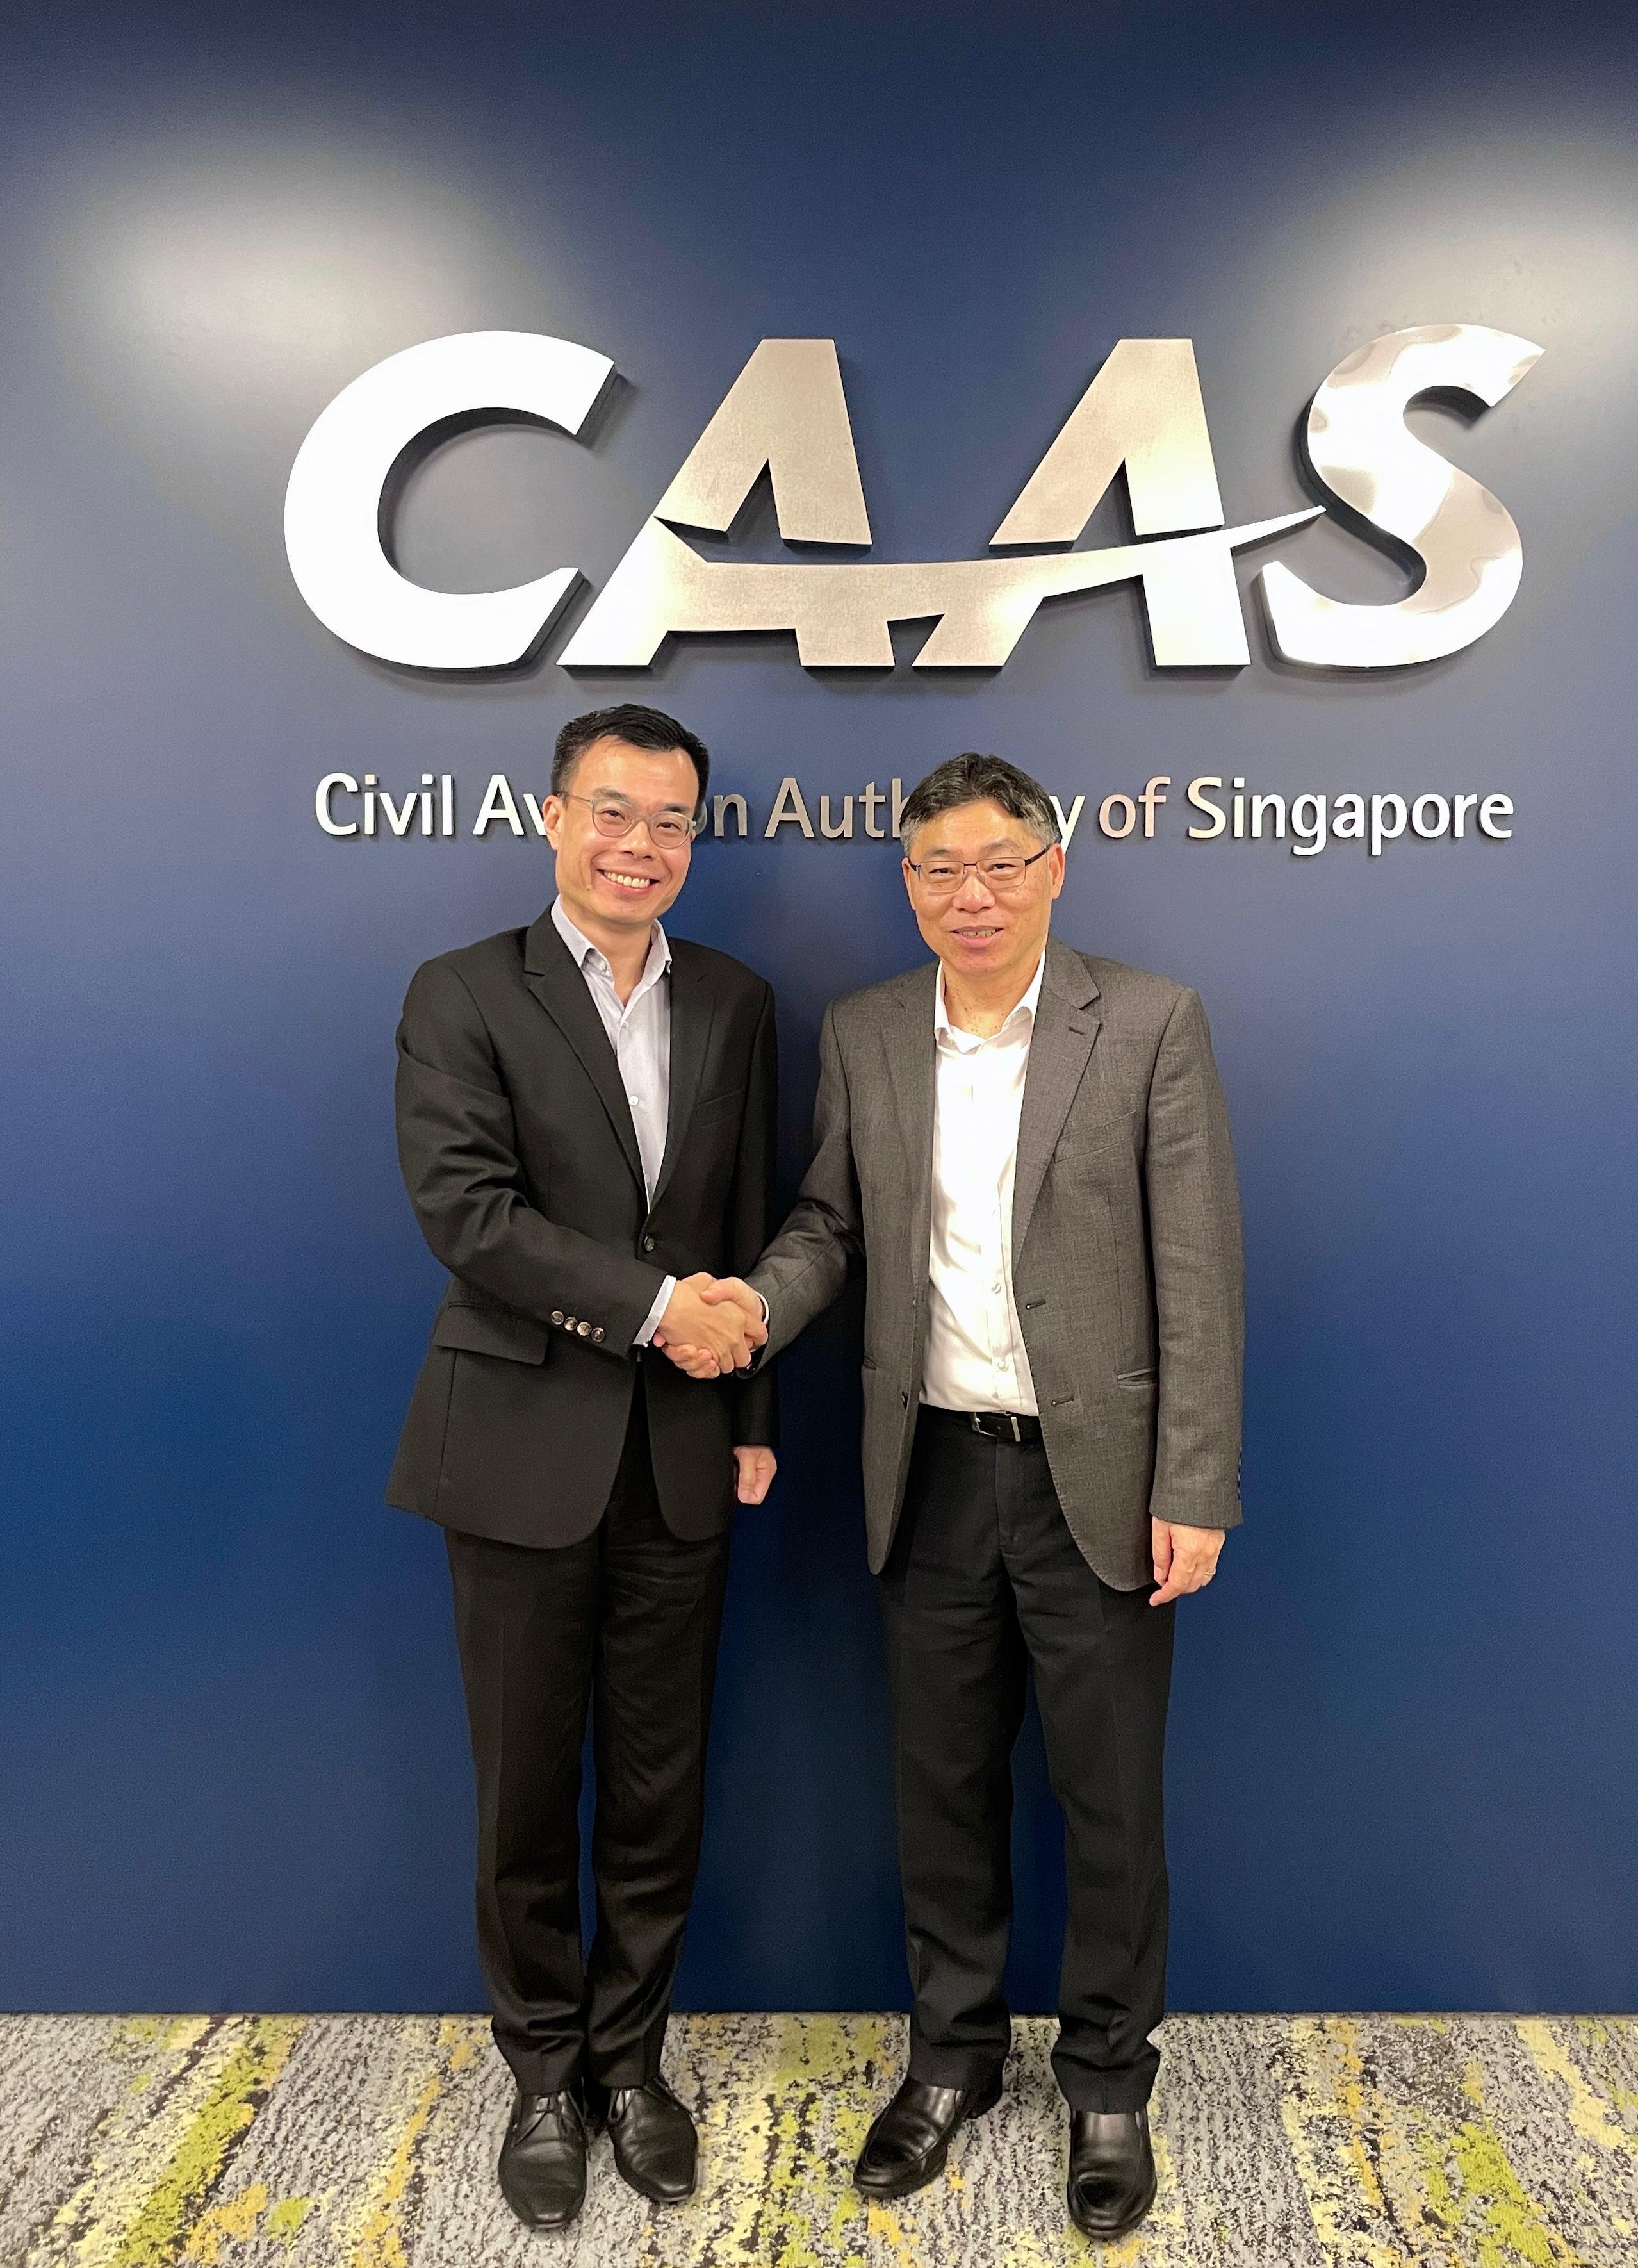 The Secretary for Transport and Logistics, Mr Lam Sai-hung, continued his visit to Singapore today (January 31). Mr Lam (right) is pictured with the Director-General of the Civil Aviation Authority of Singapore (CAAS), Mr Han Kok Juan (left), when Mr Lam meets with representatives from the CAAS this afternoon.